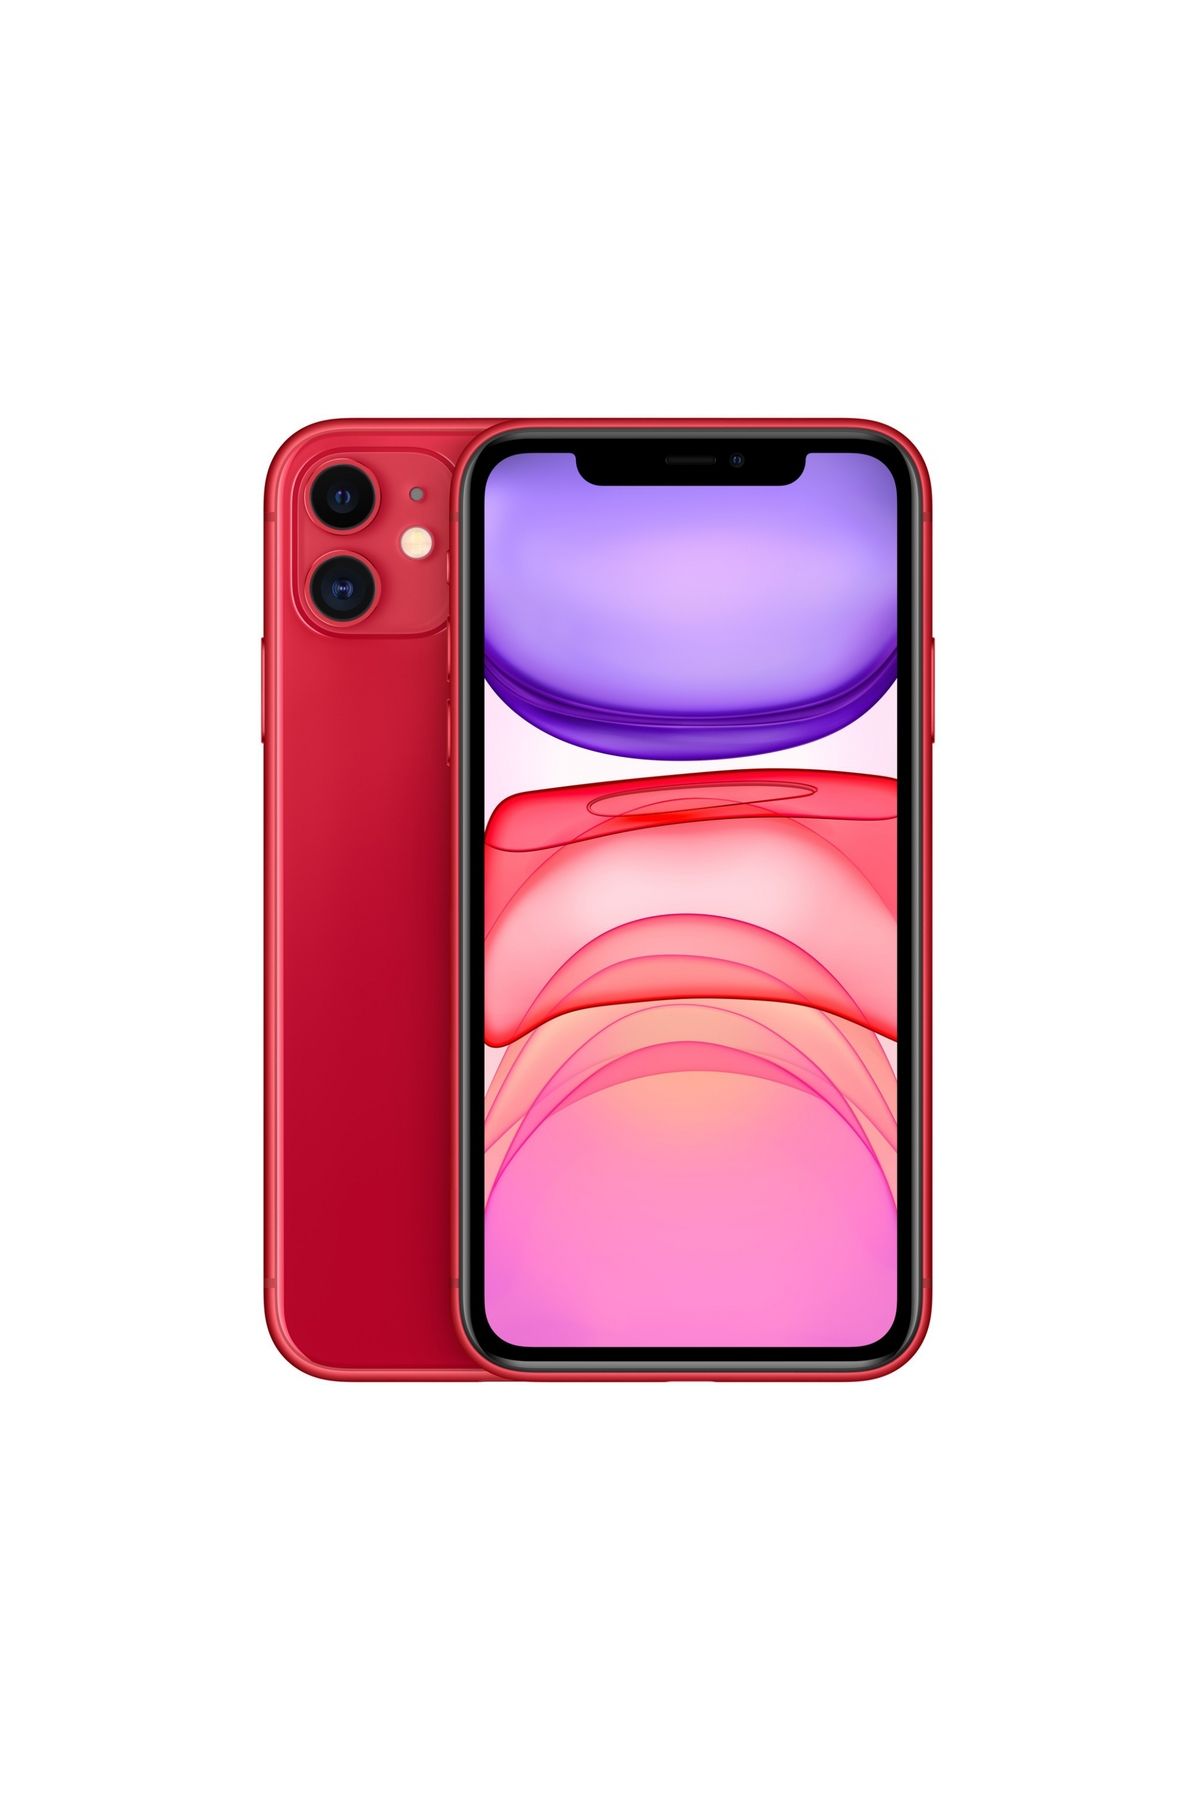 Apple MHDR3TU/A iPhone 11 (PRODUCT)RED 256GB - Yenilenmiş - A Kalite